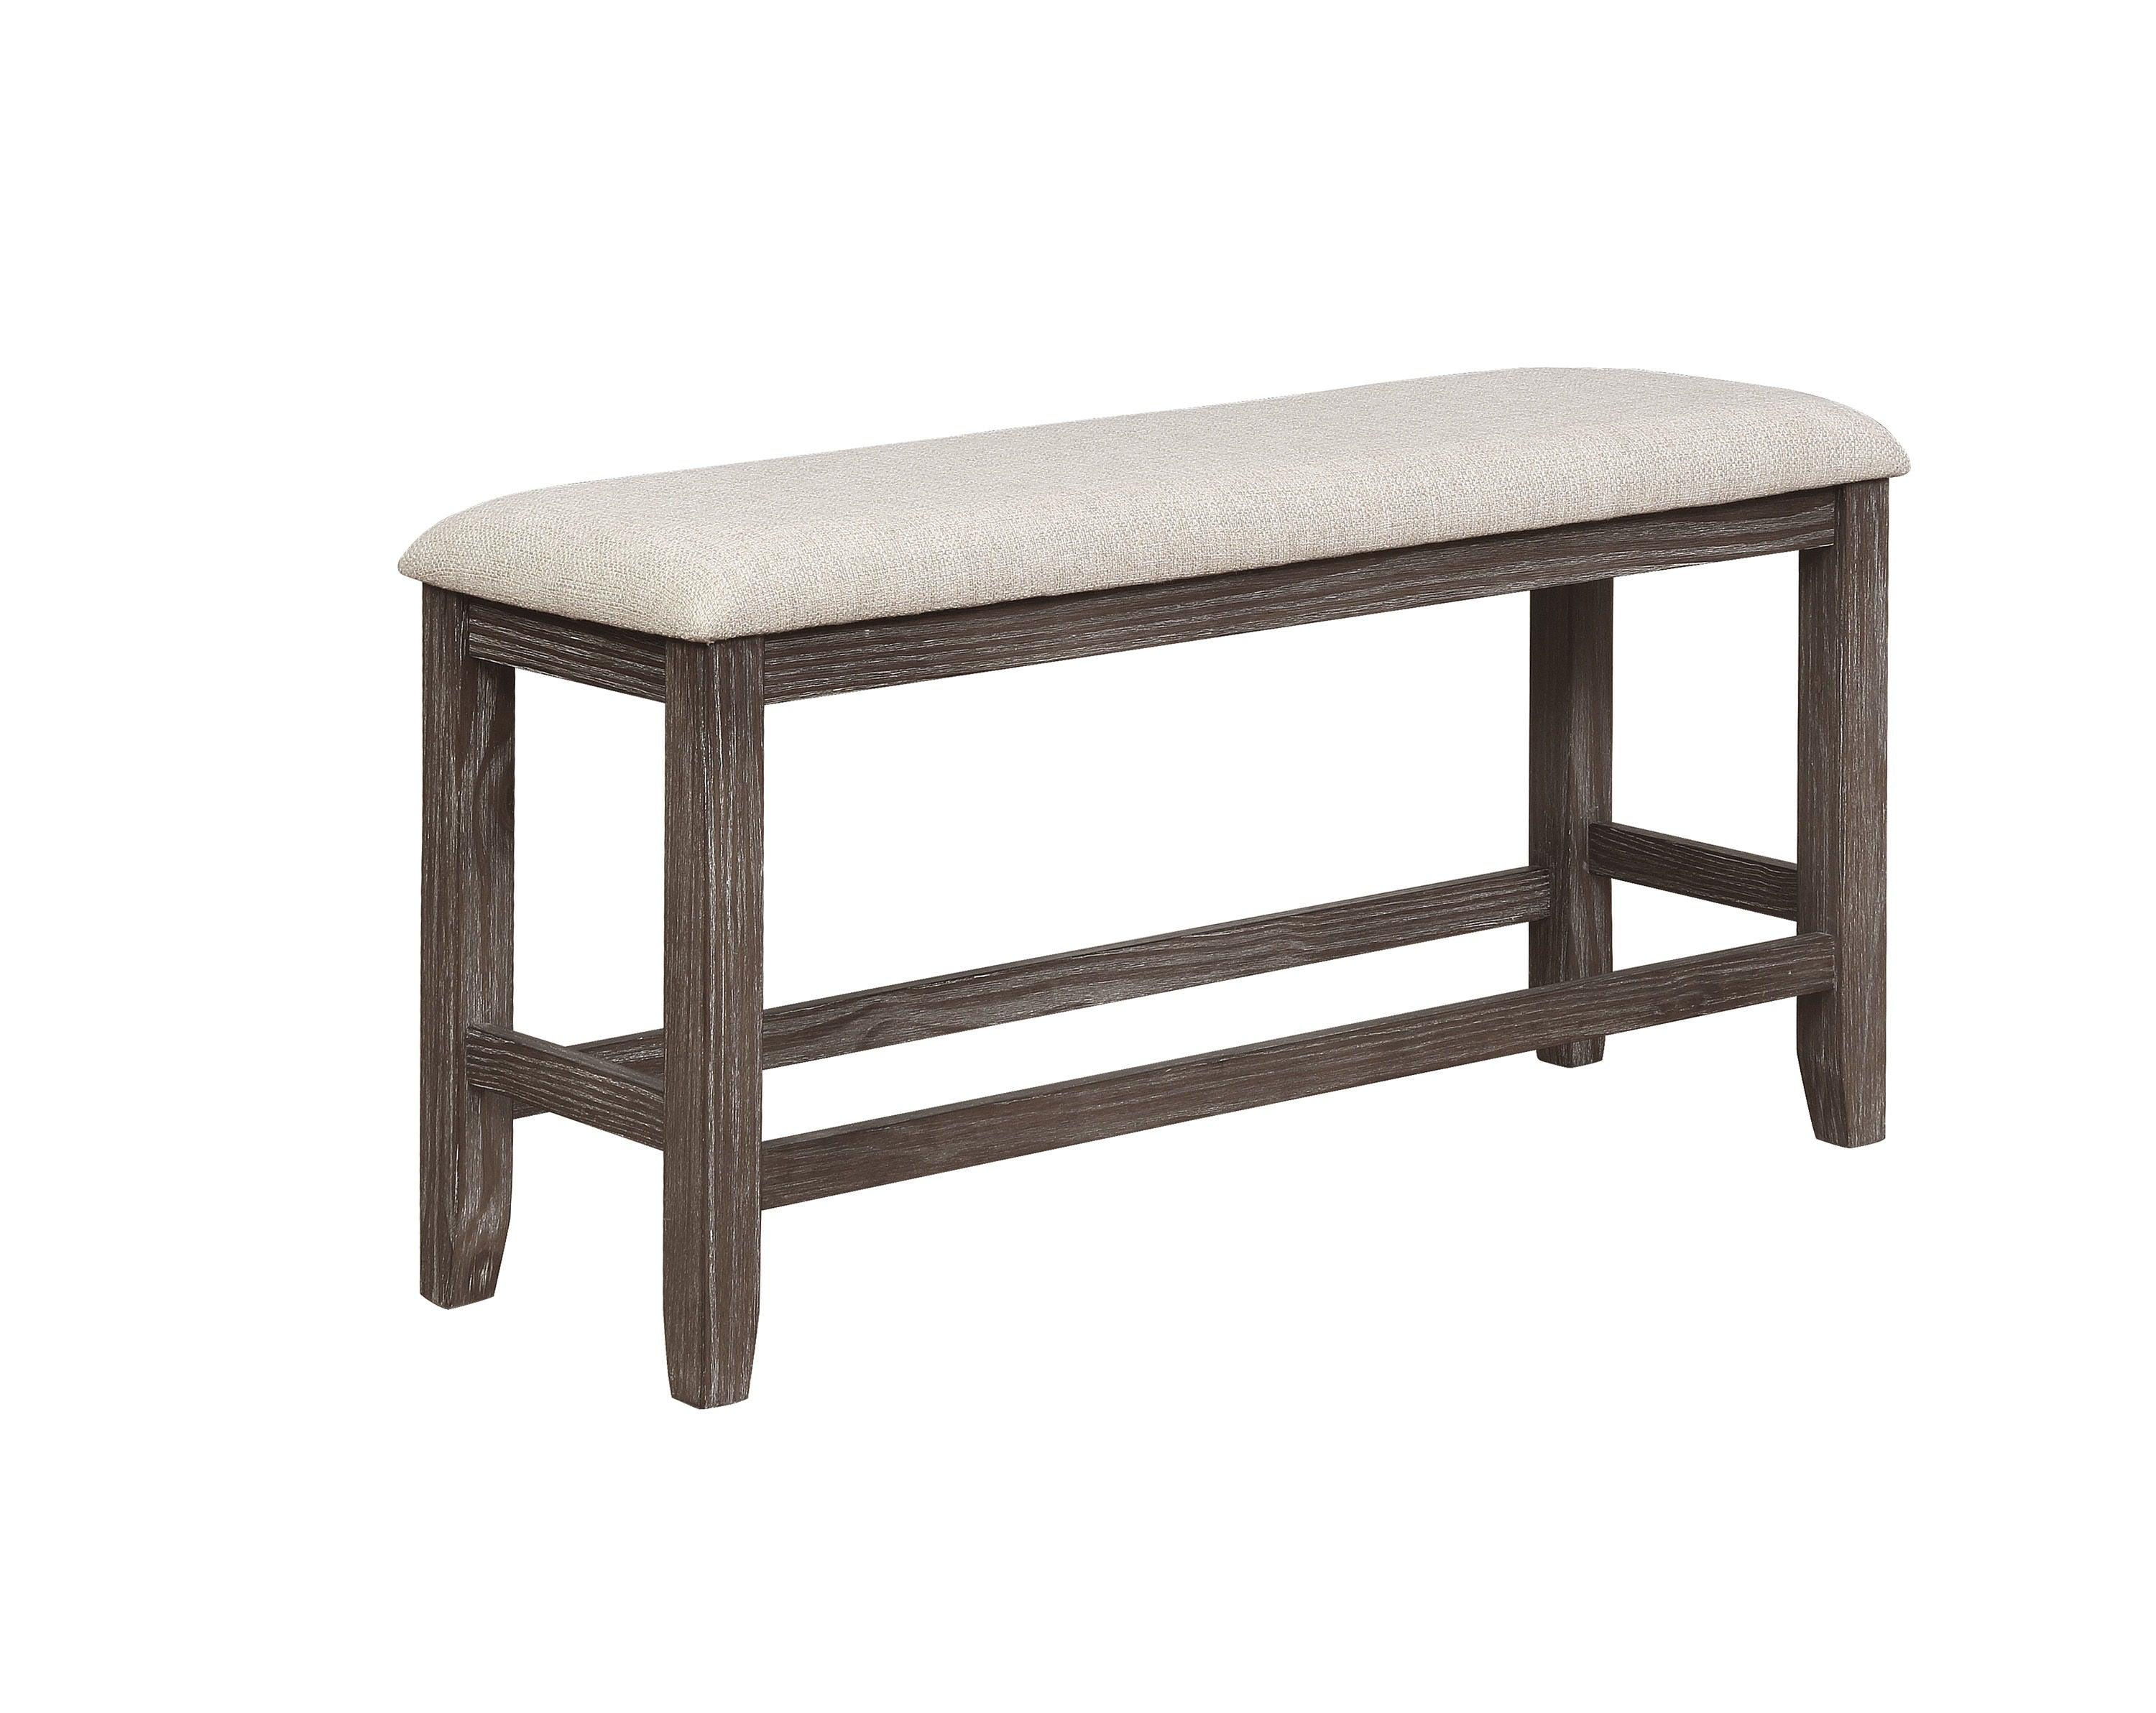 Crown Mark - Regent - Cntr Height Bench - Charcoal Black - 5th Avenue Furniture